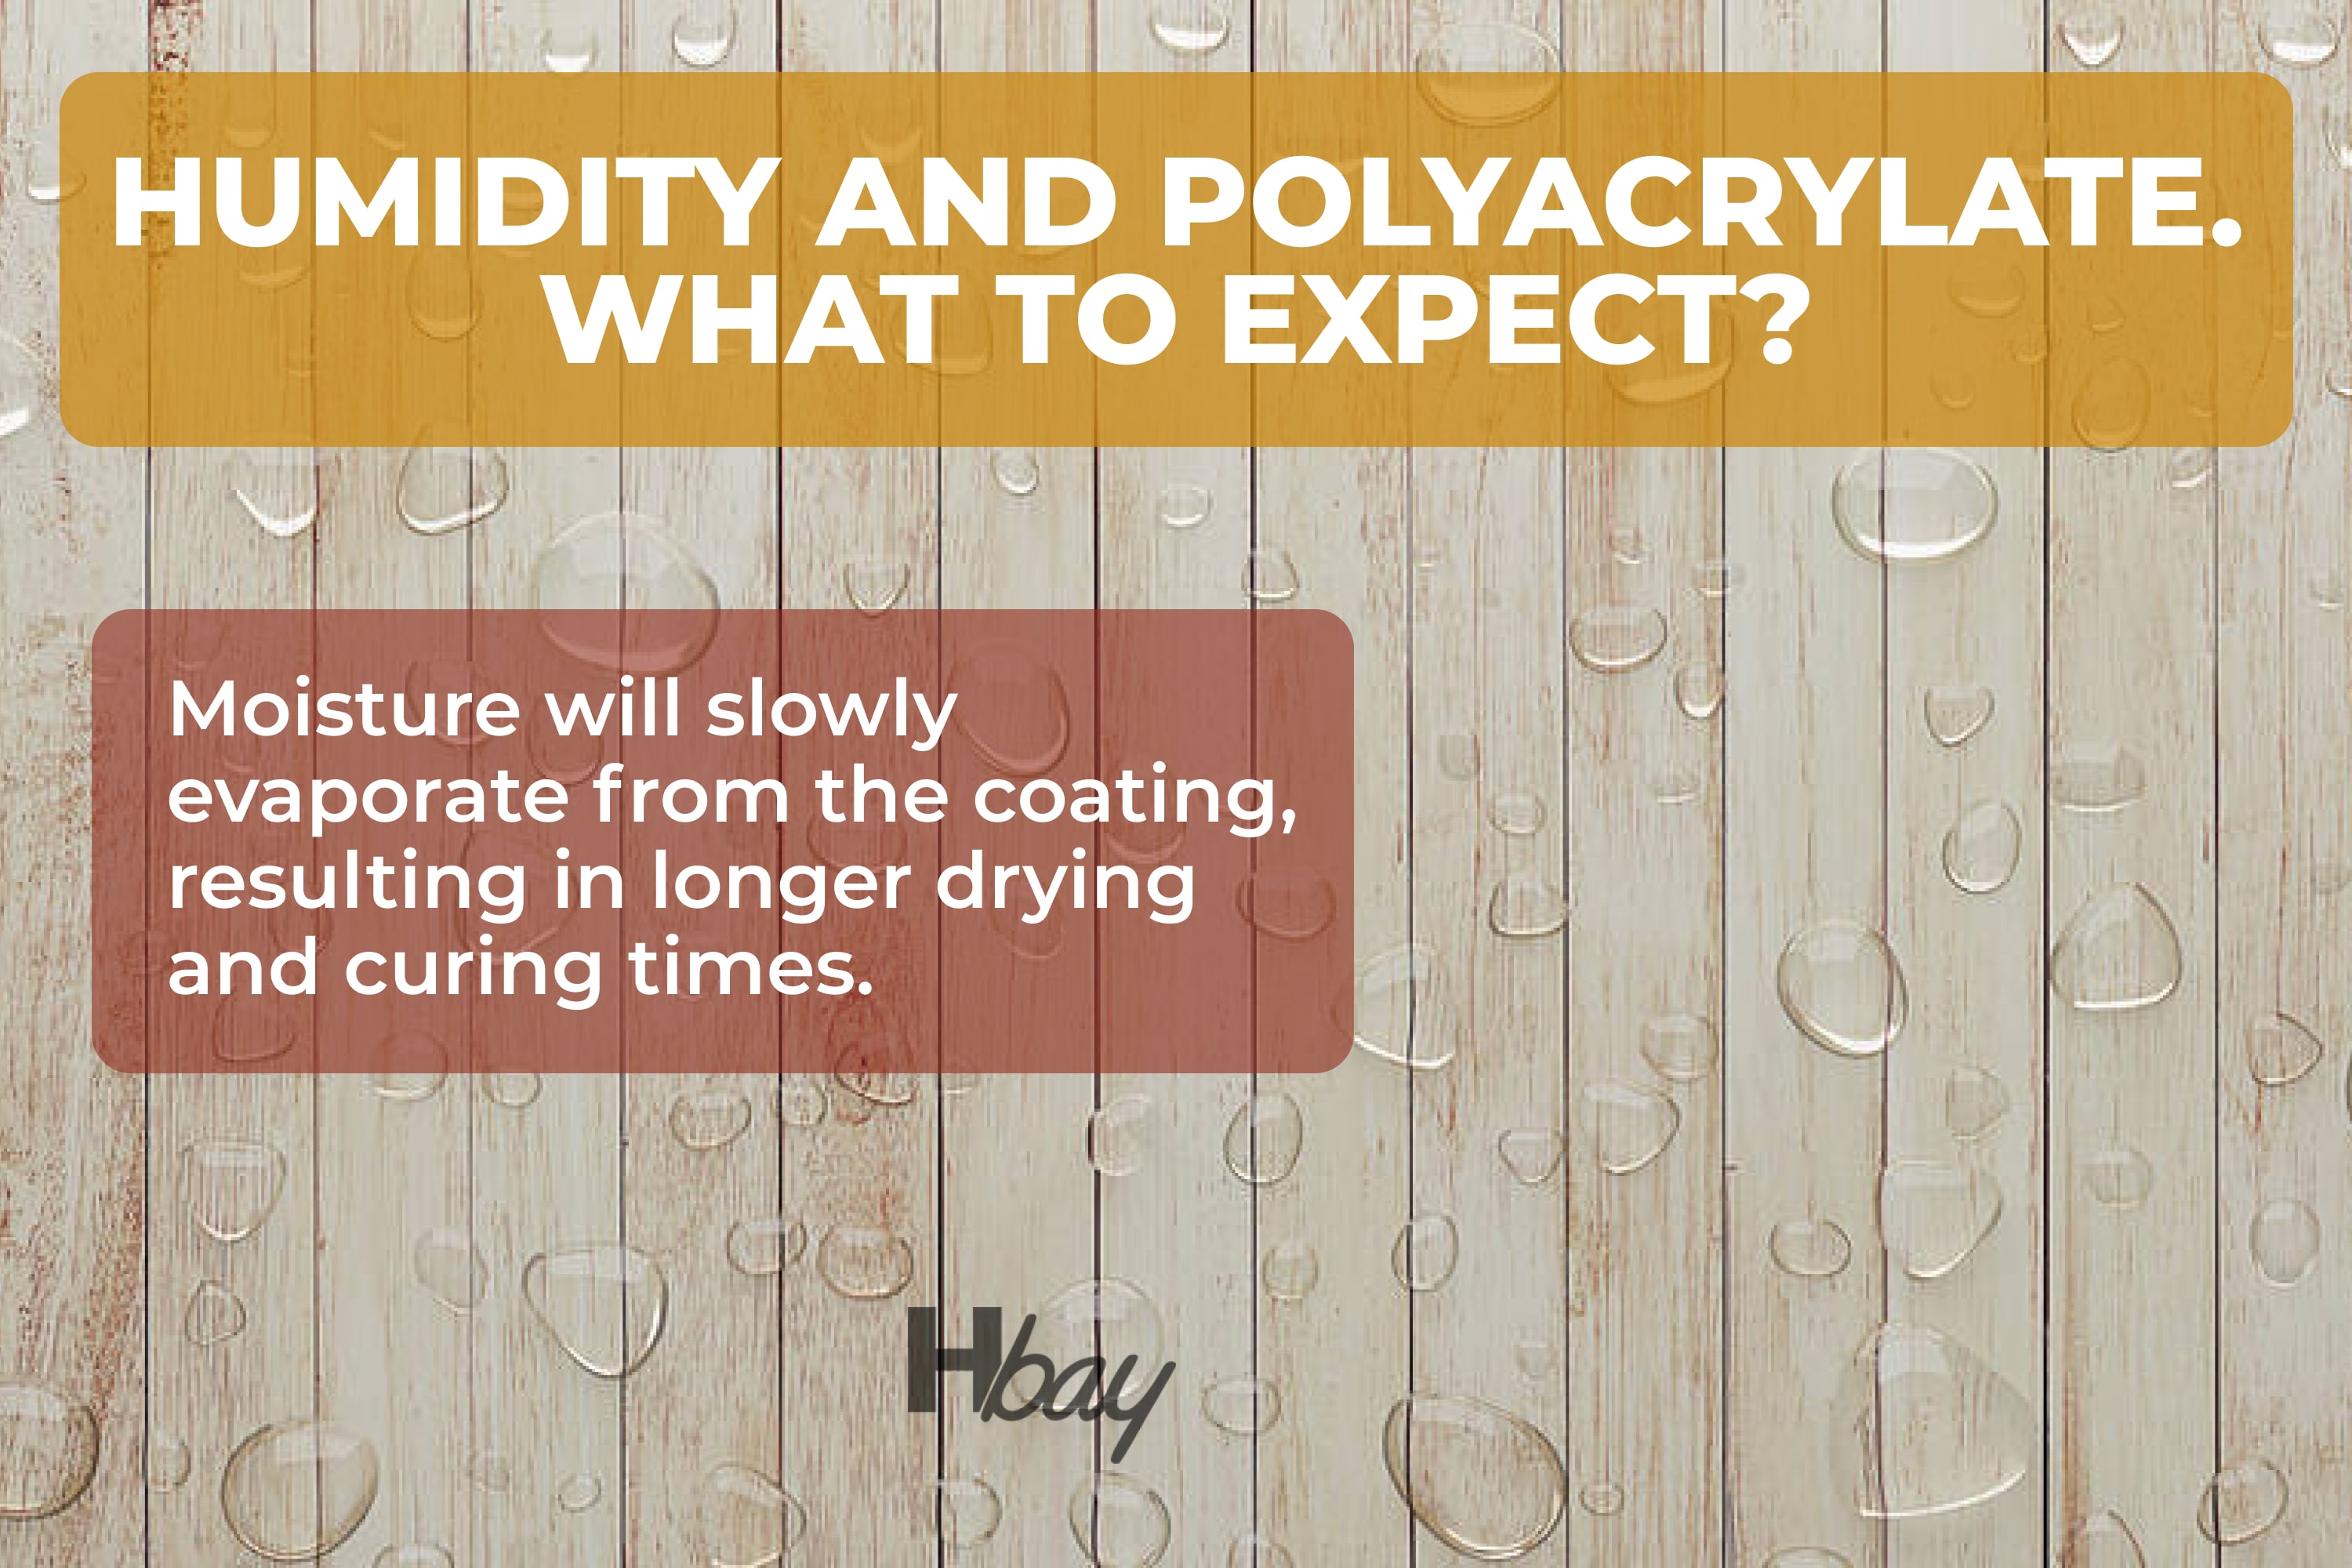 Humidity and polyacrylate. What to expect